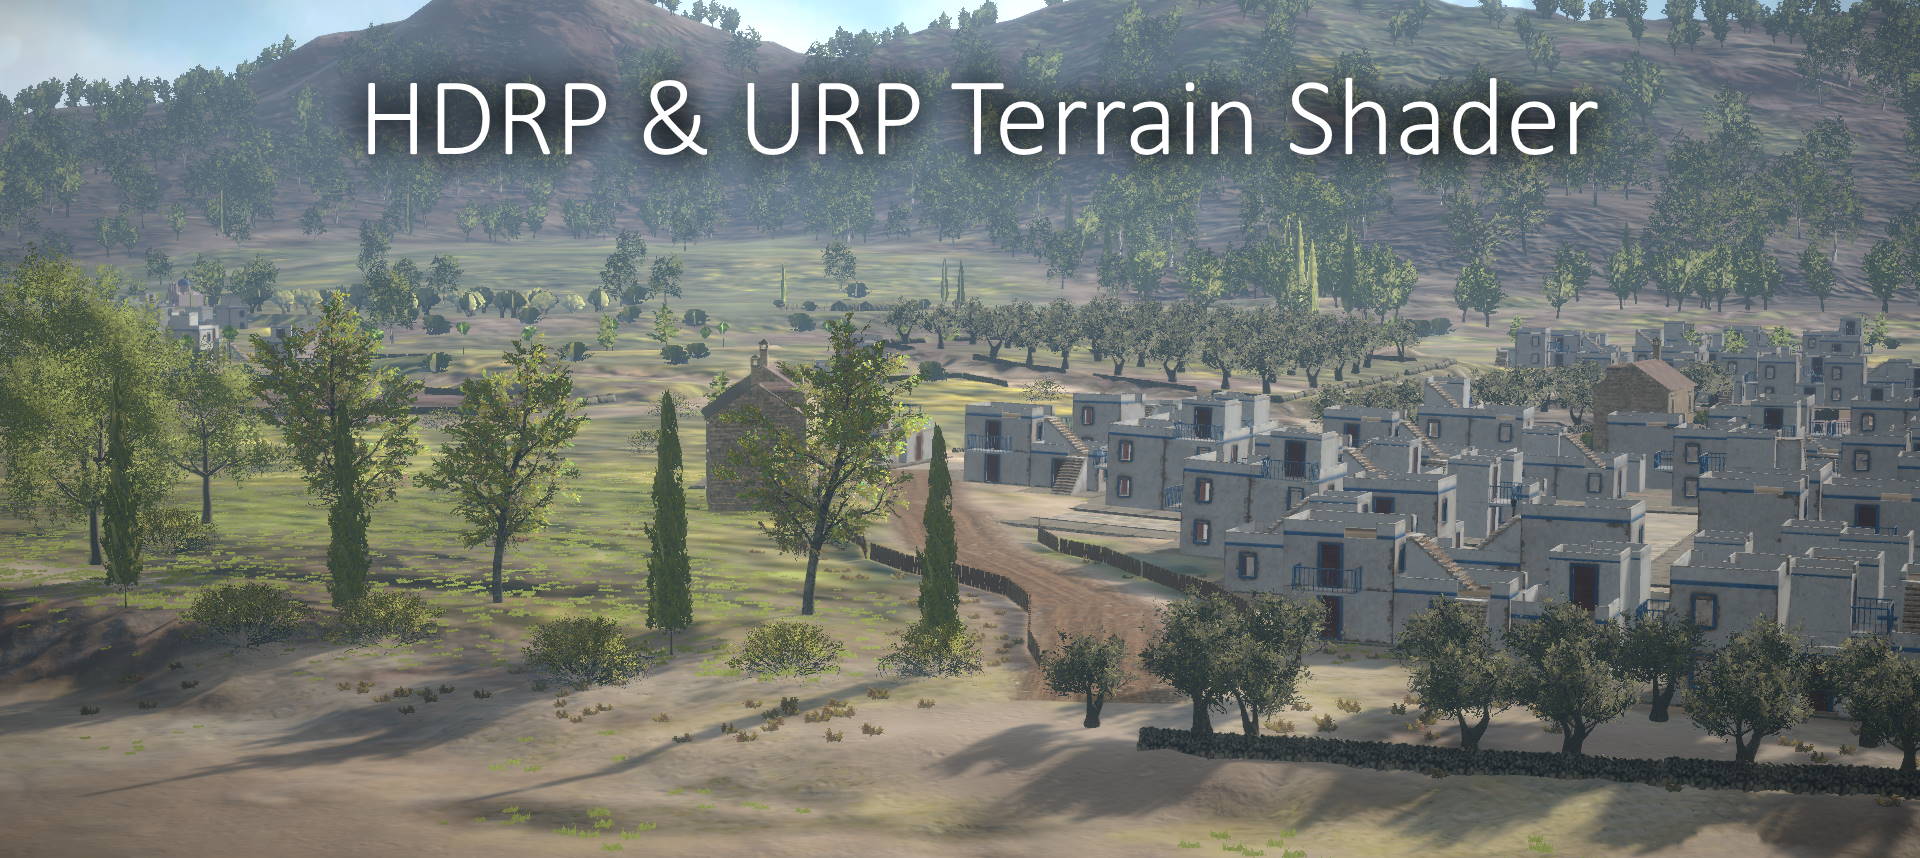 HDRP & URP terrain shader system icon